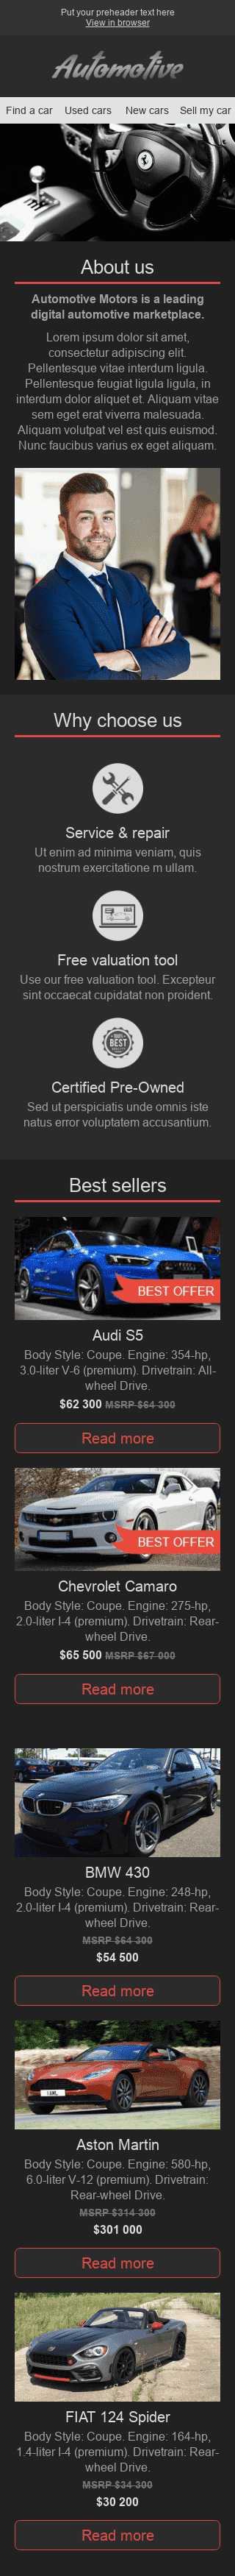 Promo Email Template "Online Shop" for Auto & Moto industry mobile view